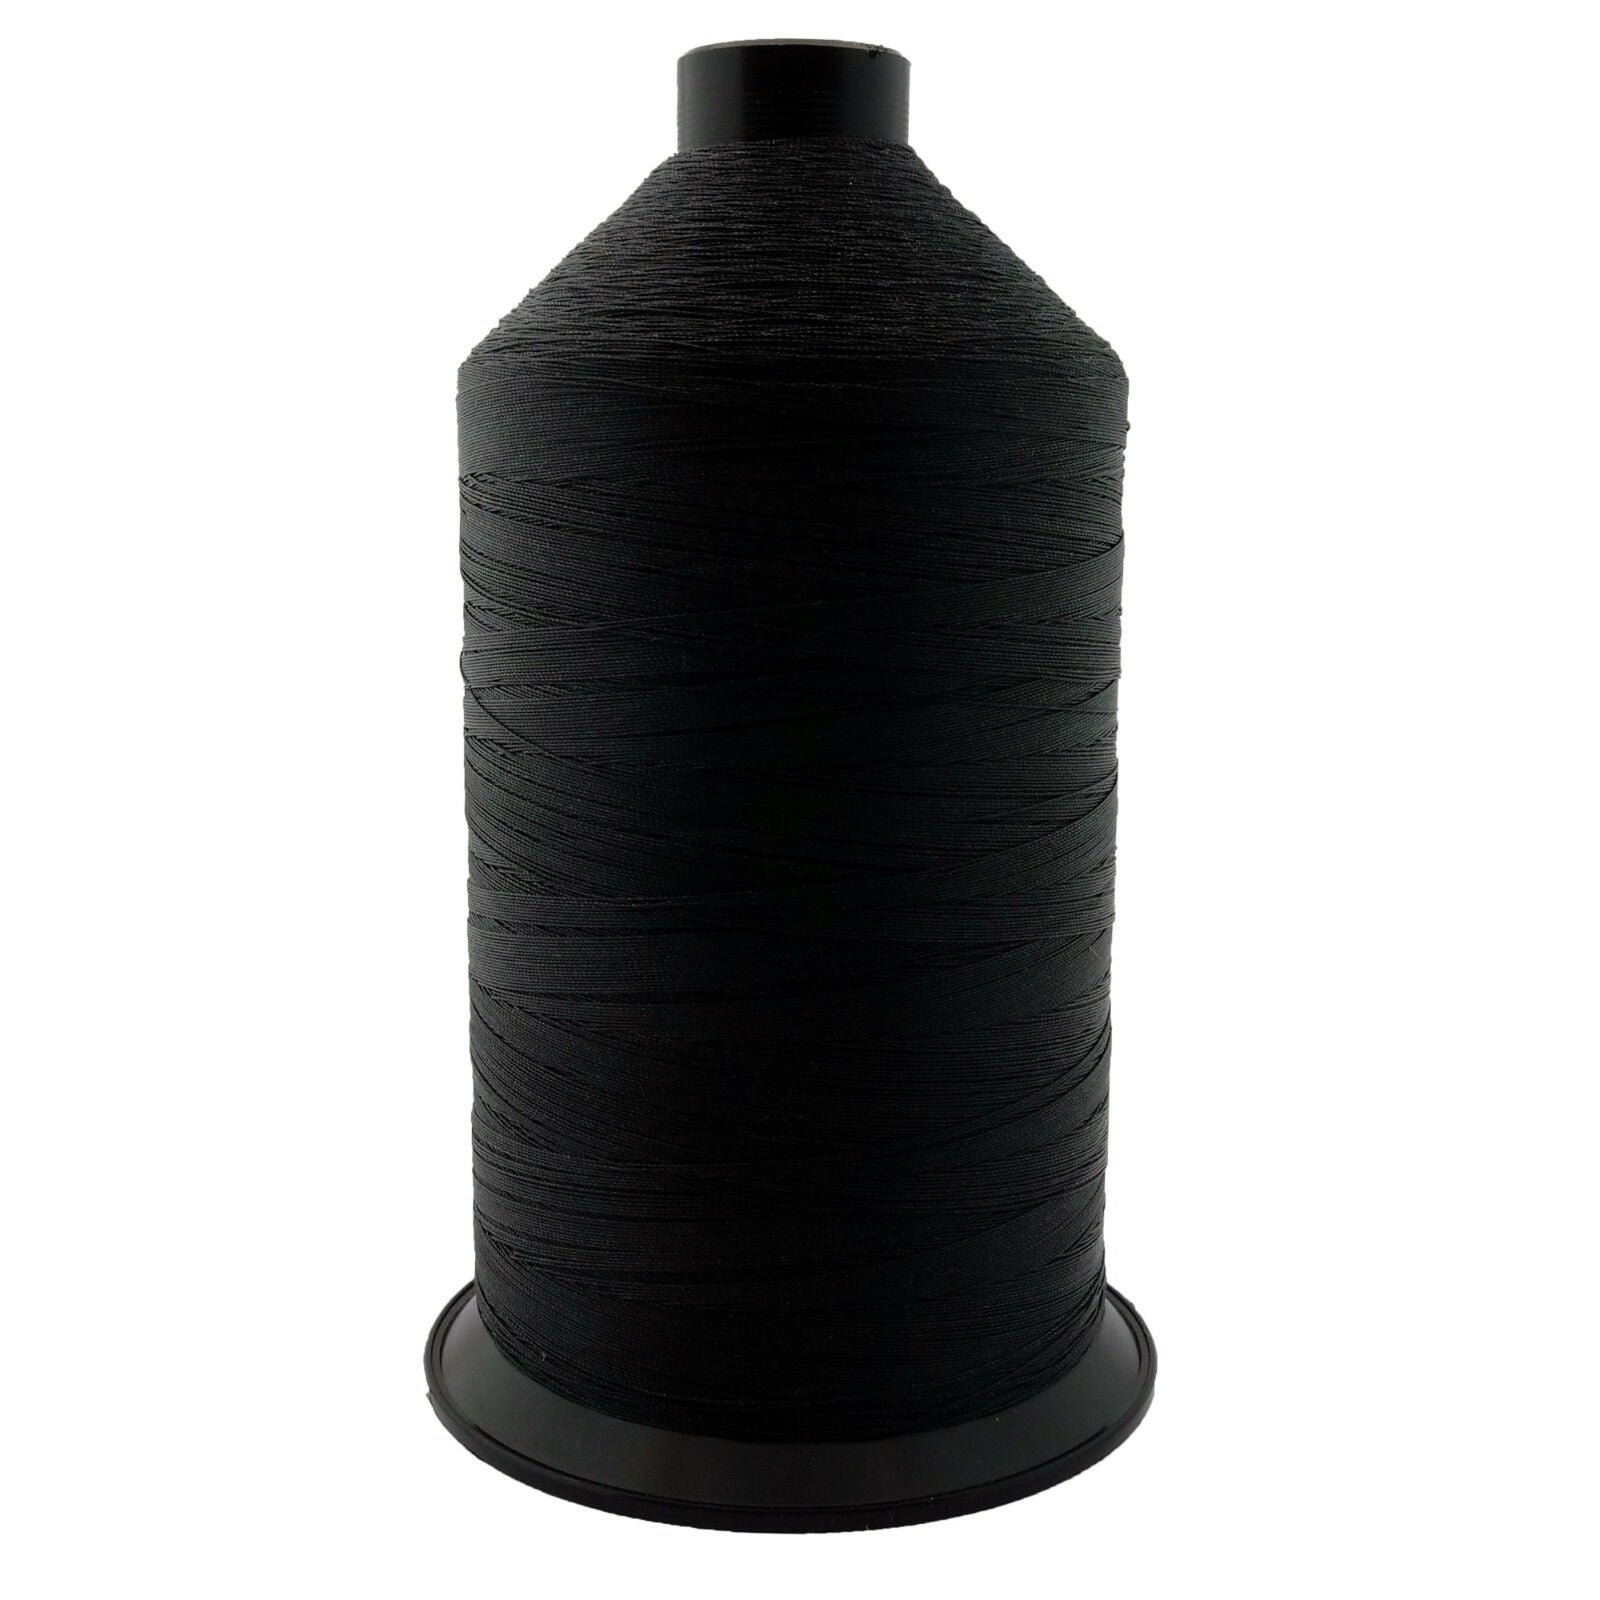 White Tex 70 Bonded Nylon Thread #69, 6000 Yards Spool For Leather Uph -  Cutex Sewing Supplies